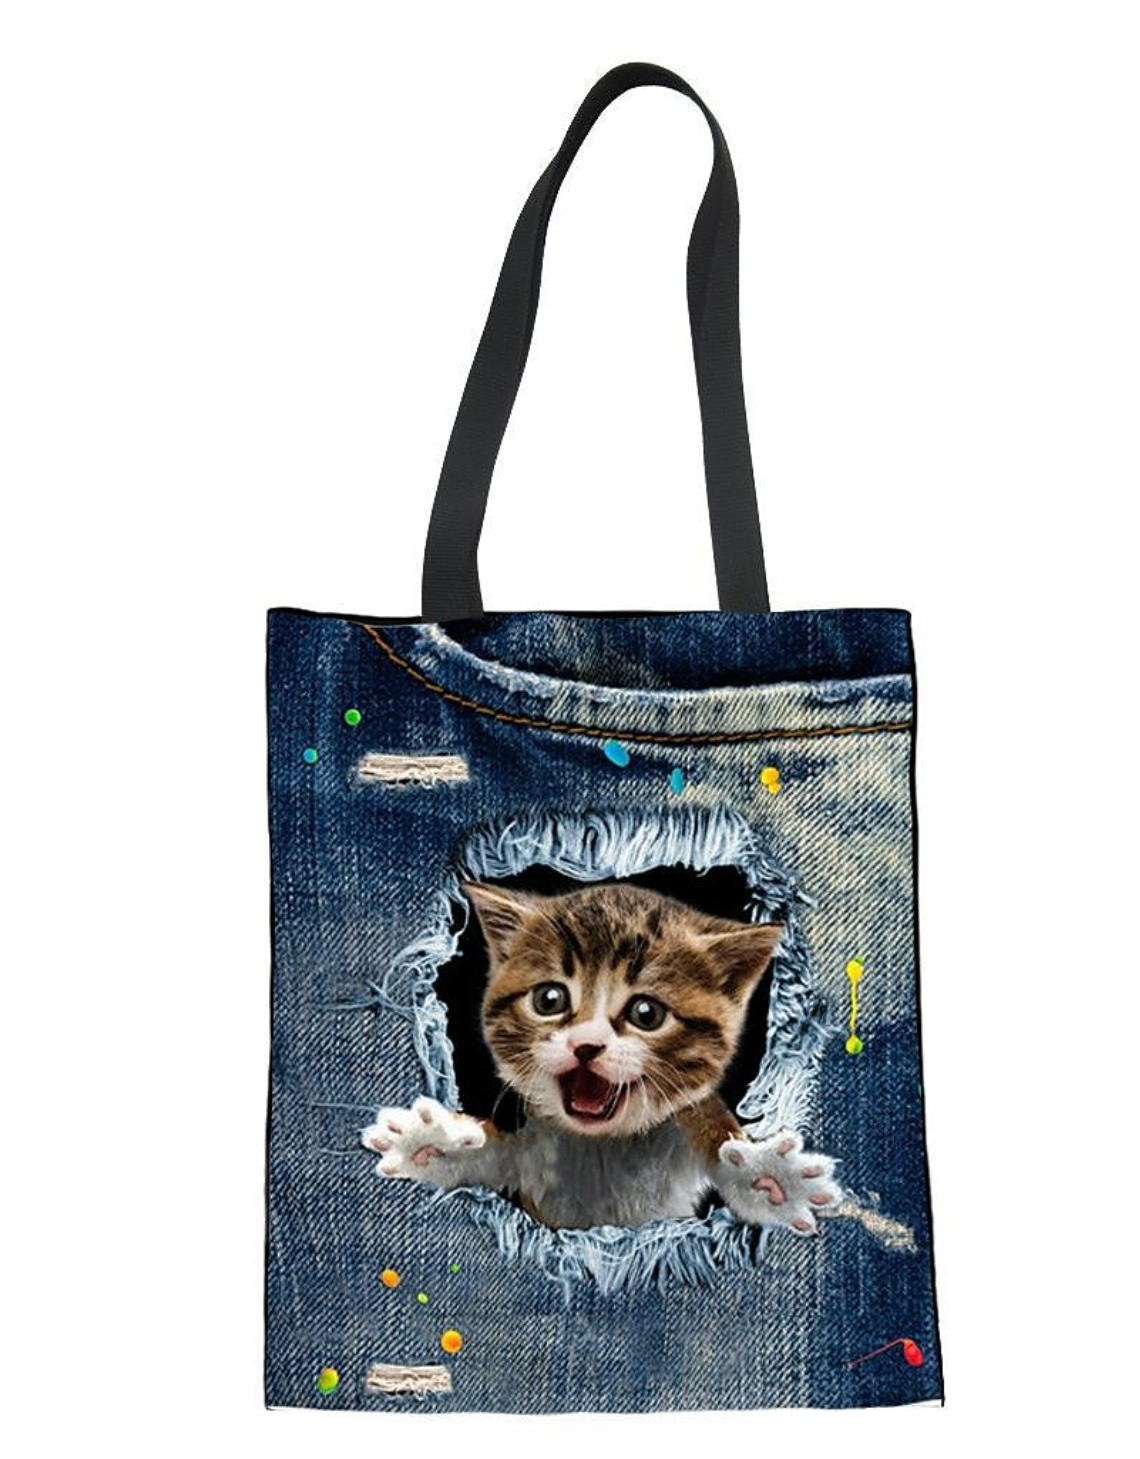 Women's Tote Shoulder Bag Canvas Tote Bag Polyester Shopping Holiday Print Large Capacity Foldable Lightweight Cat C3303Z22 CA4914Z22 CA4912Z22